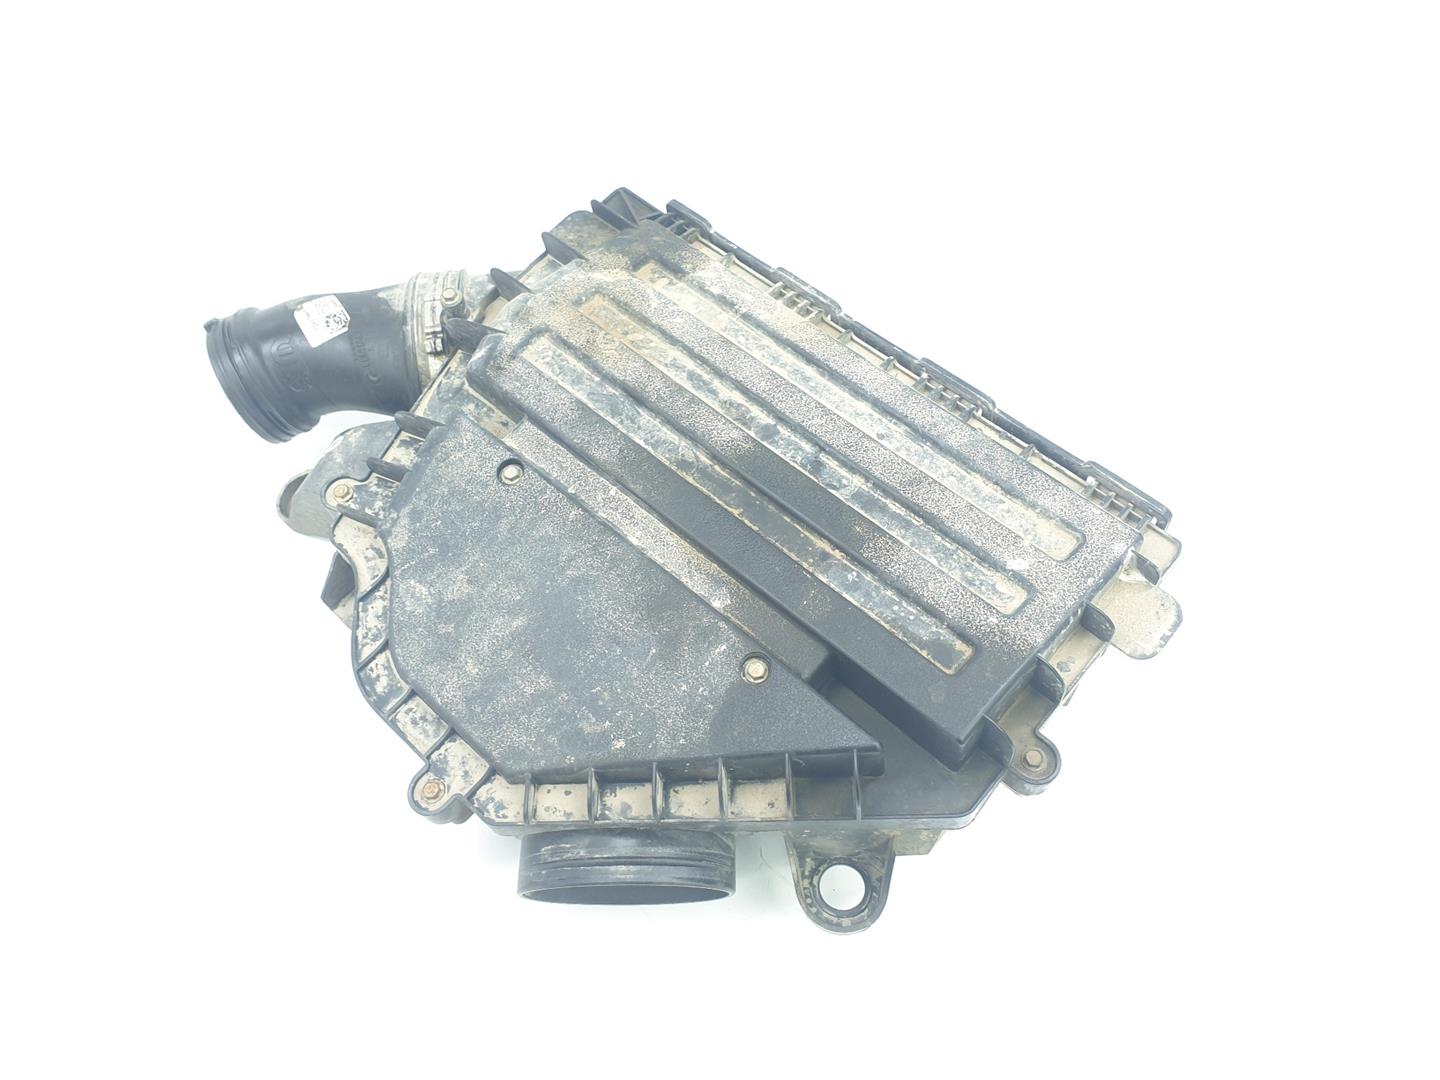 OPEL Combo D (2011-2020) Other Engine Compartment Parts 95524774, 95524774 24243615